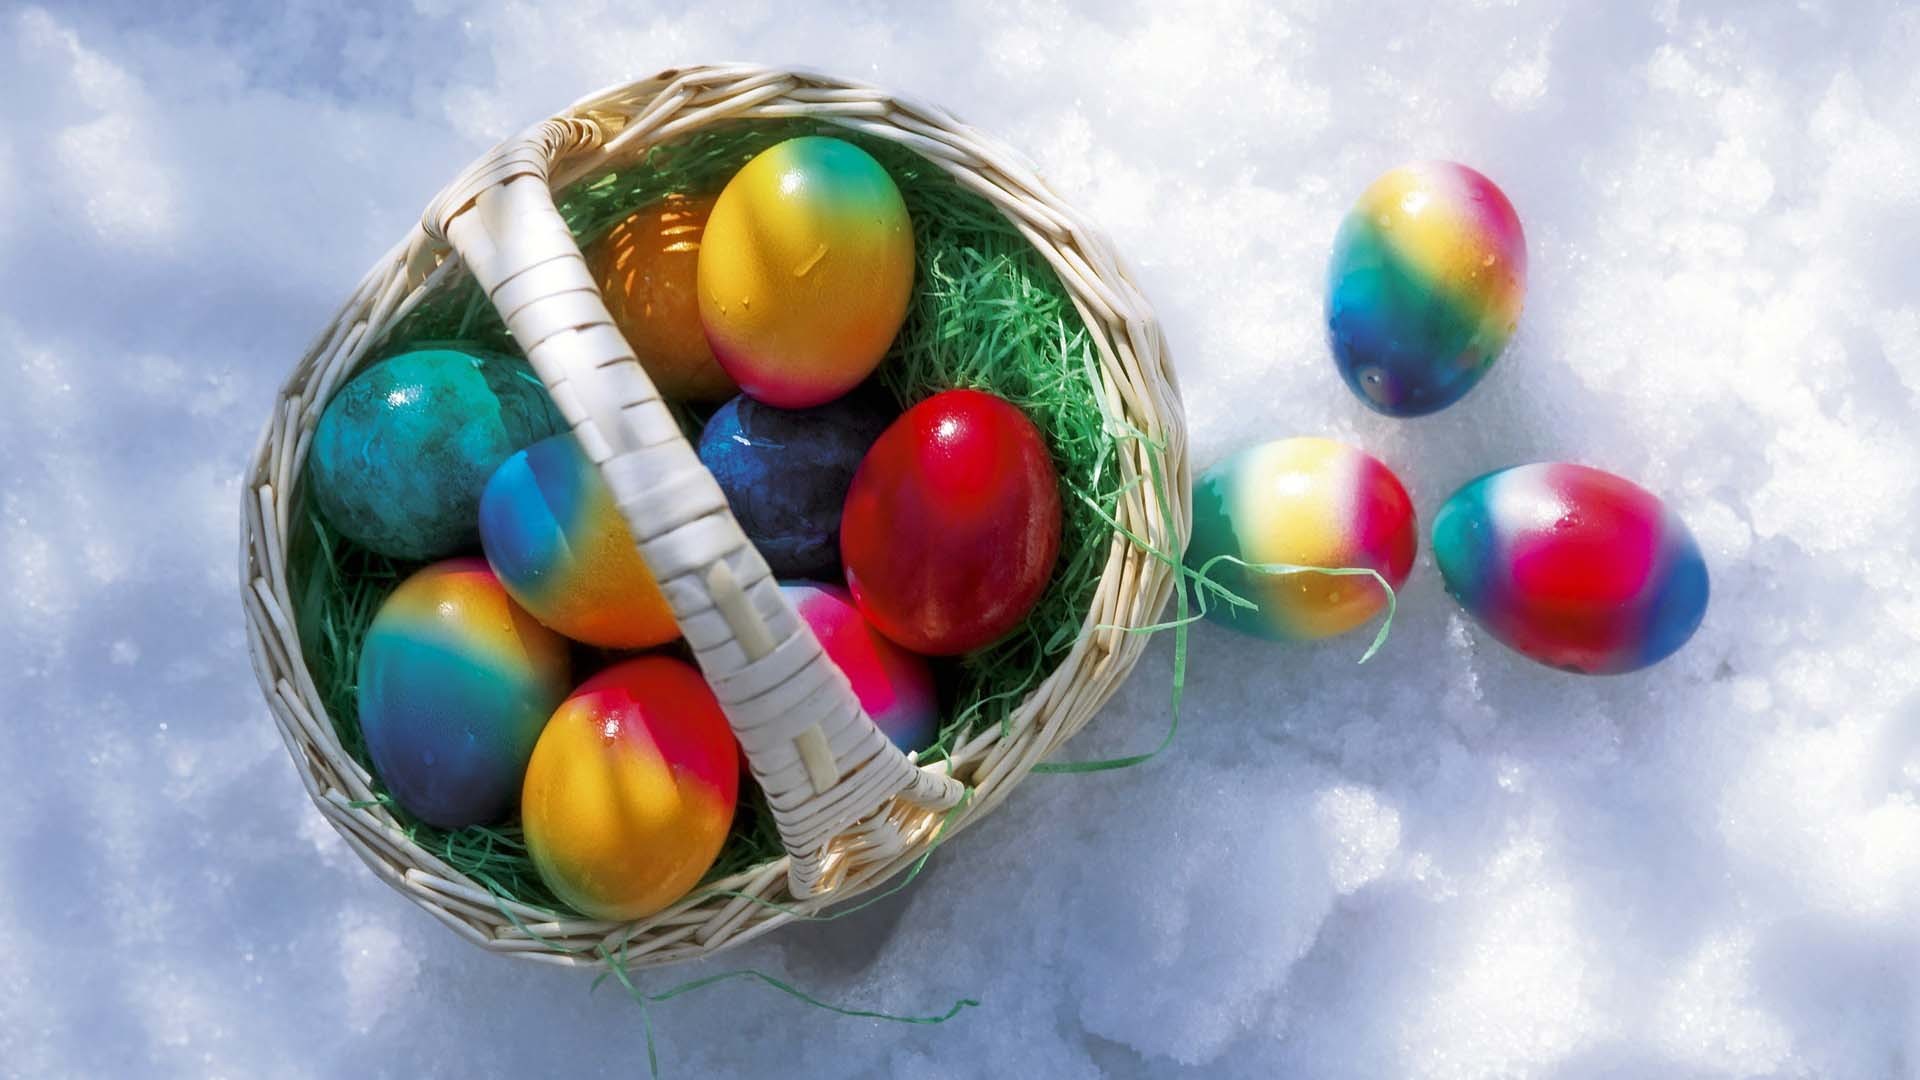 1920x1080 Easter Eggs In The Snow Wallpaper  - Cool PC Wallpapers